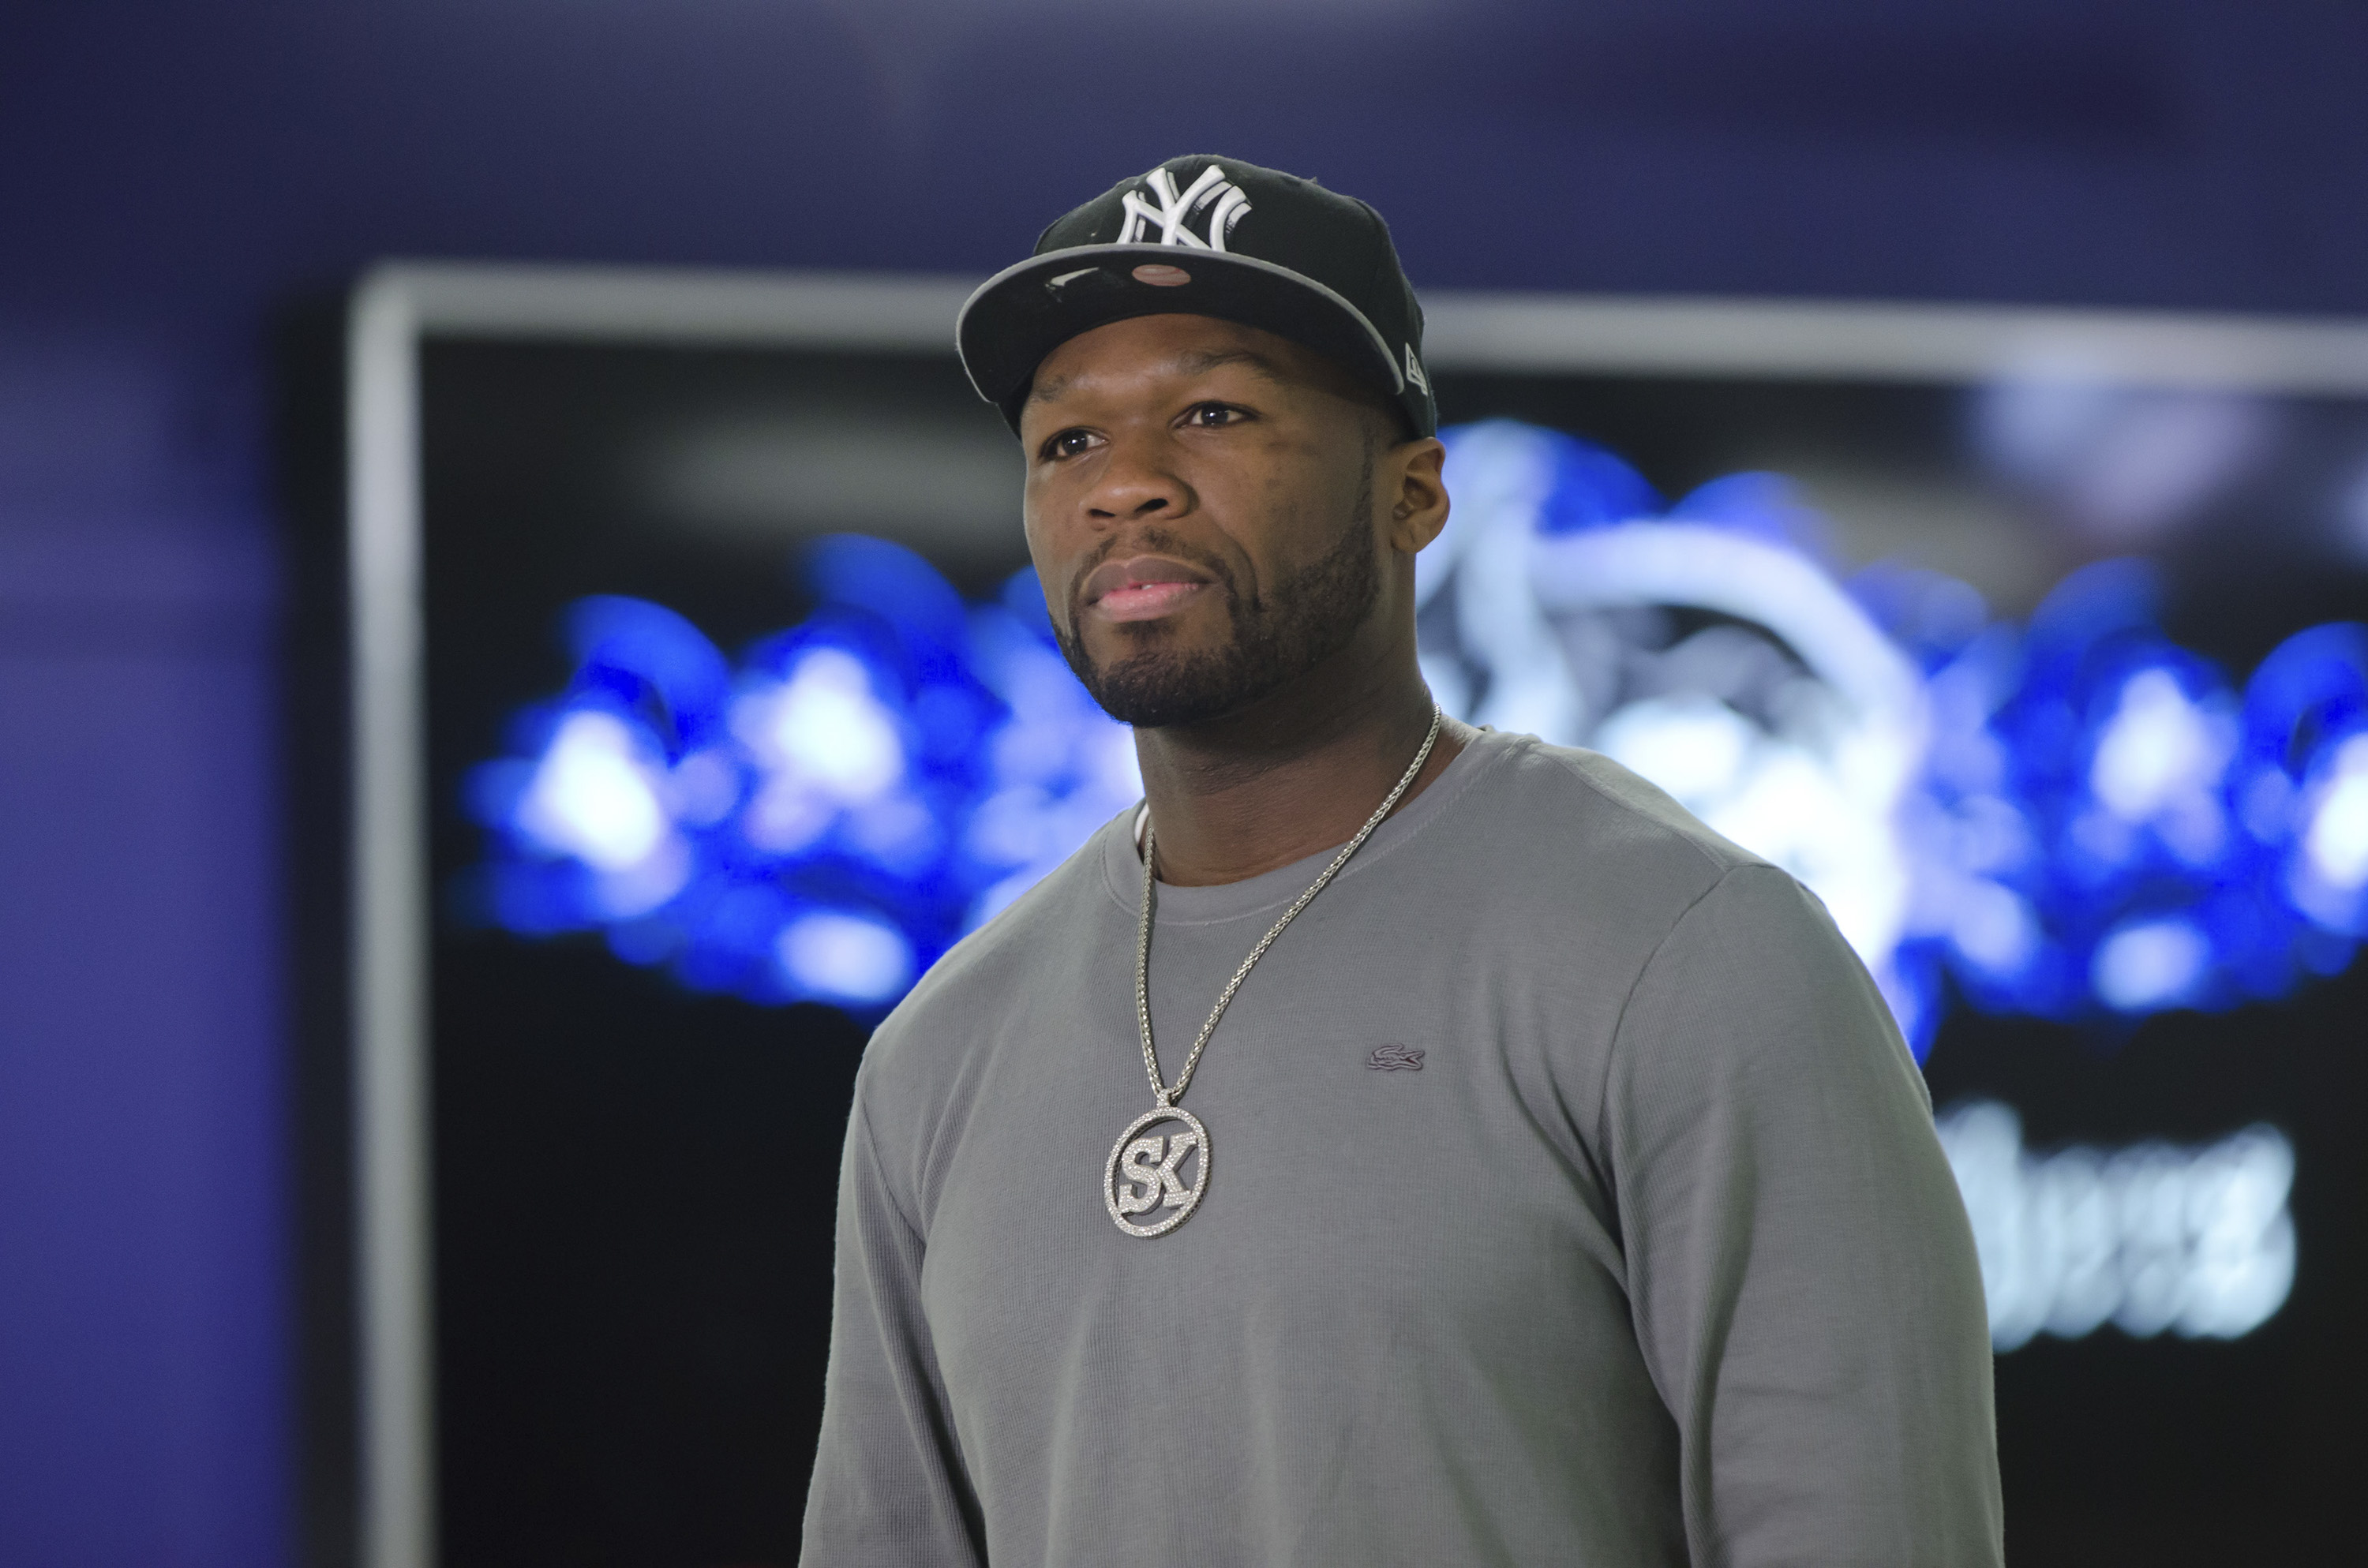 50 Cent wearing a necklace